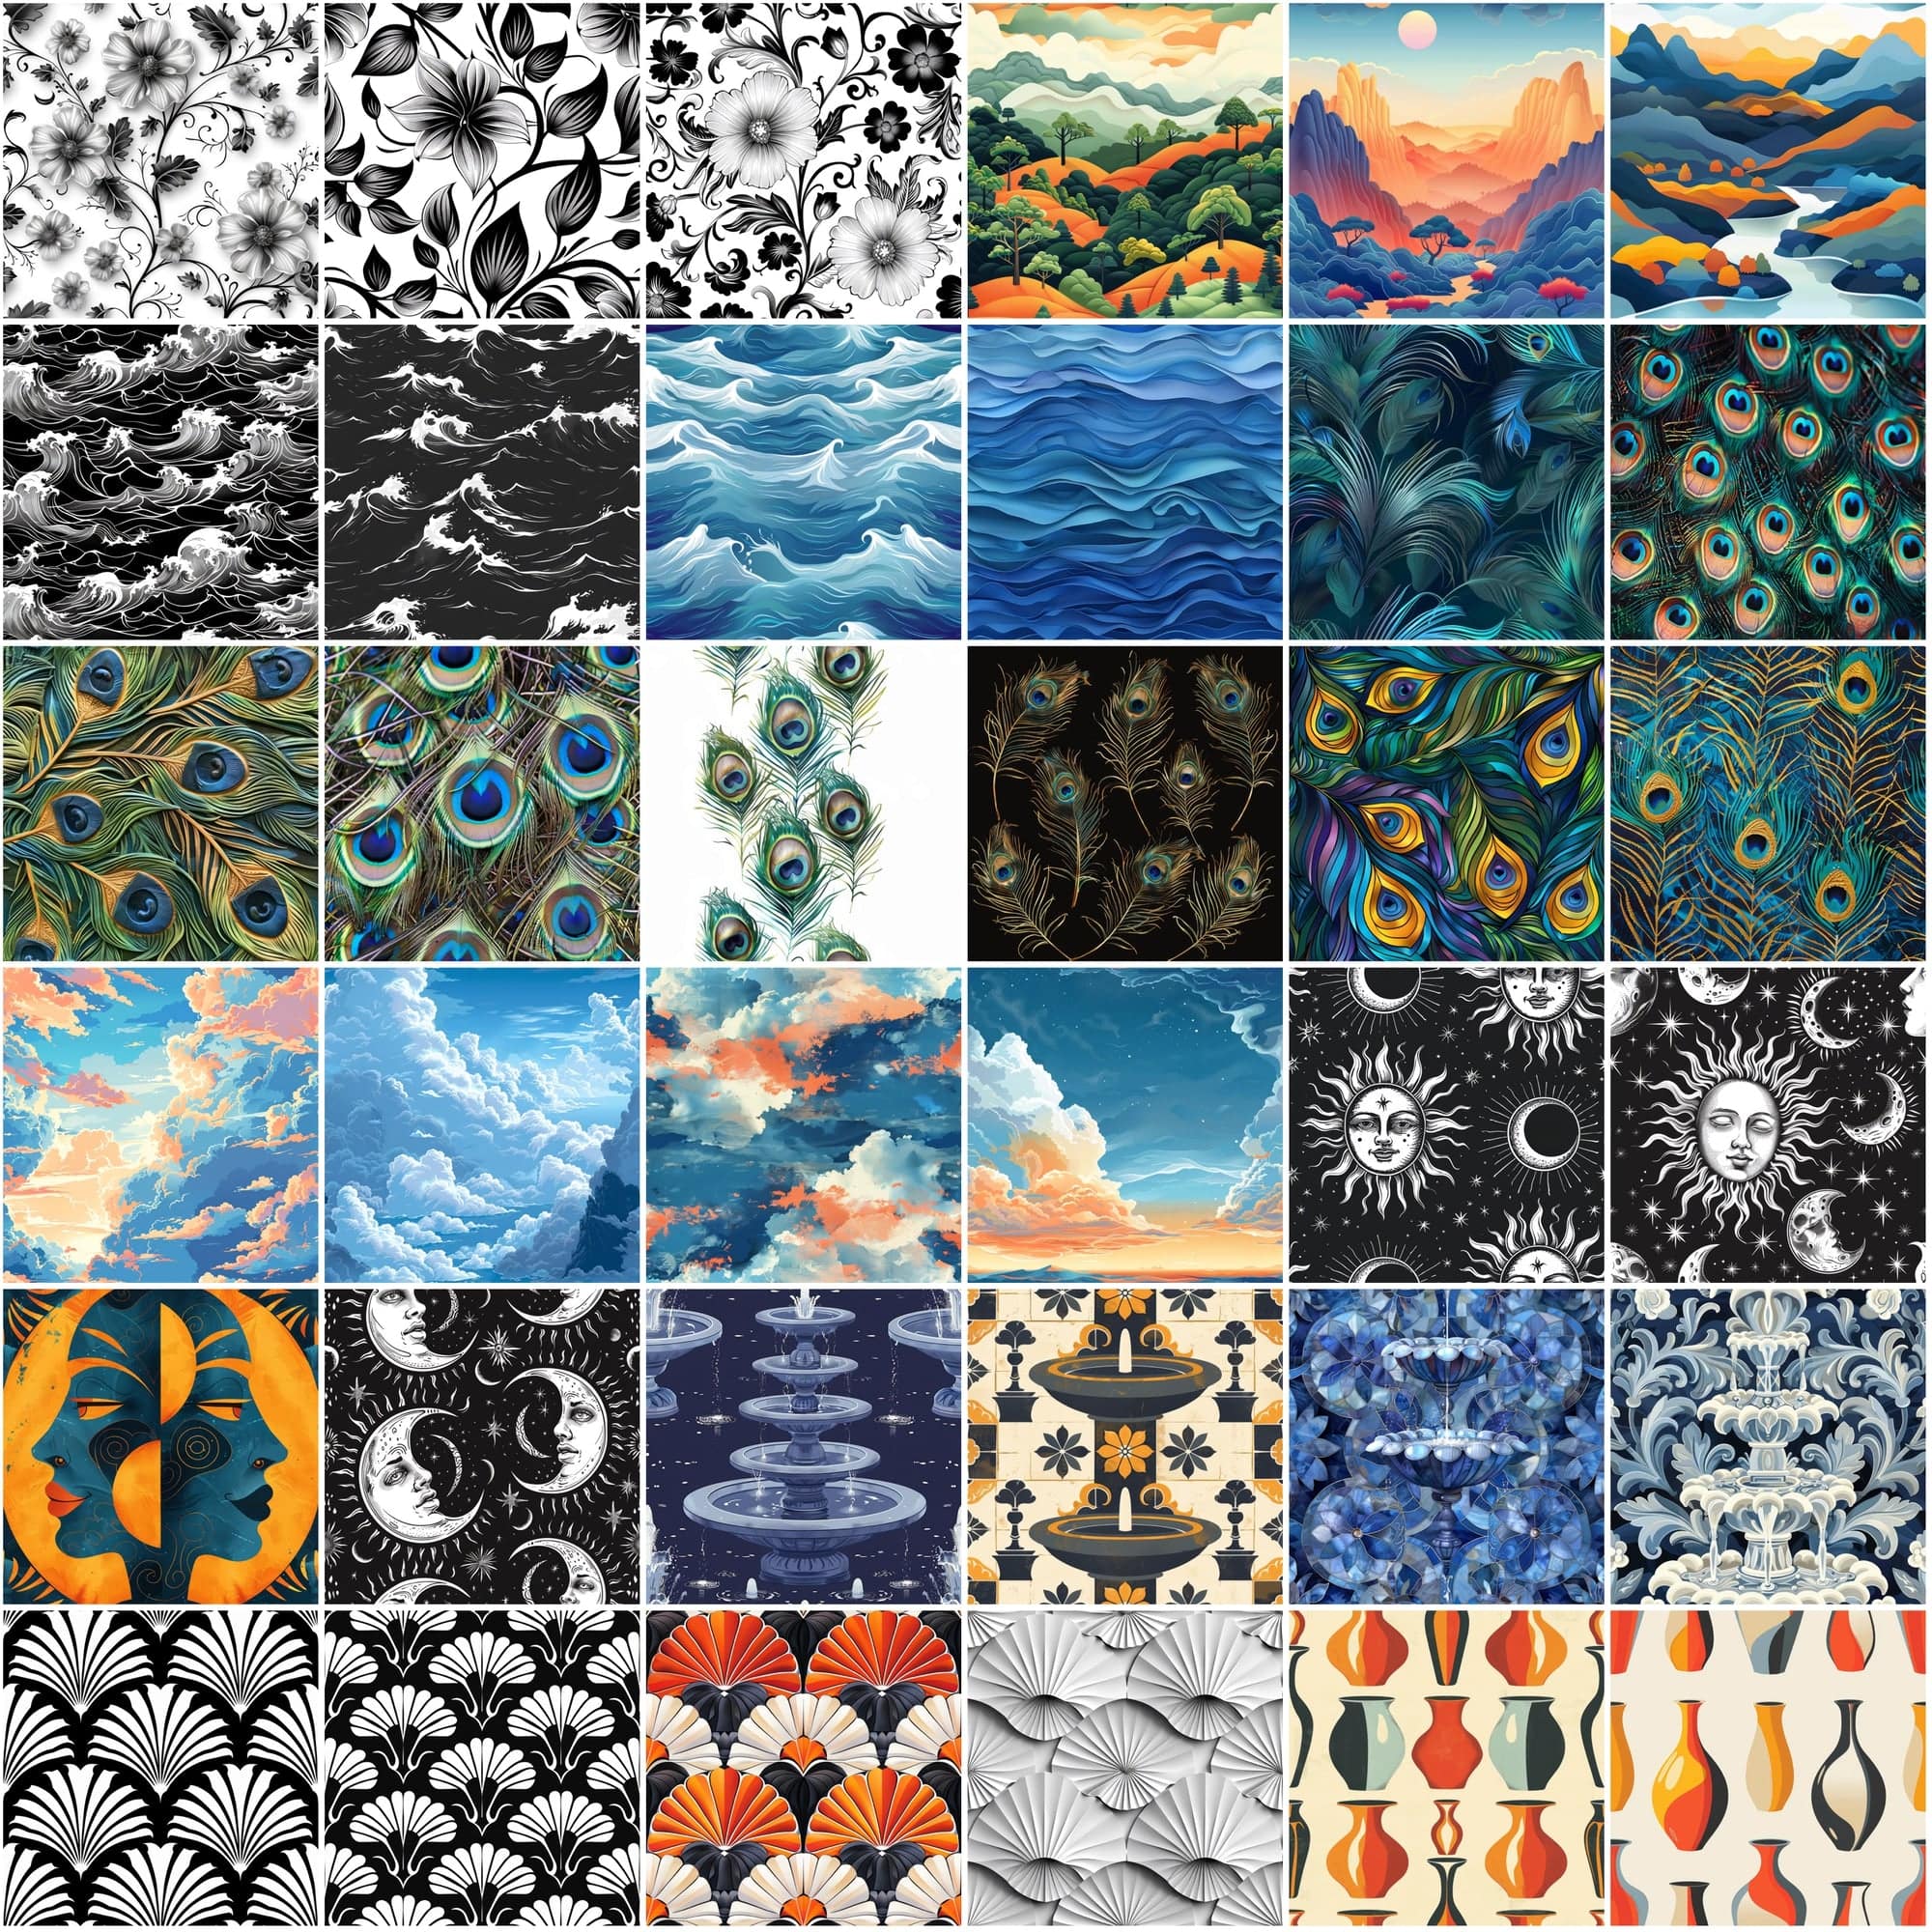 340 Seamless Texture Images with Photoshop Patterns - Abstract, Geometric, Art Deco, High-Resolution, Commercial Use Digital Download Sumobundle